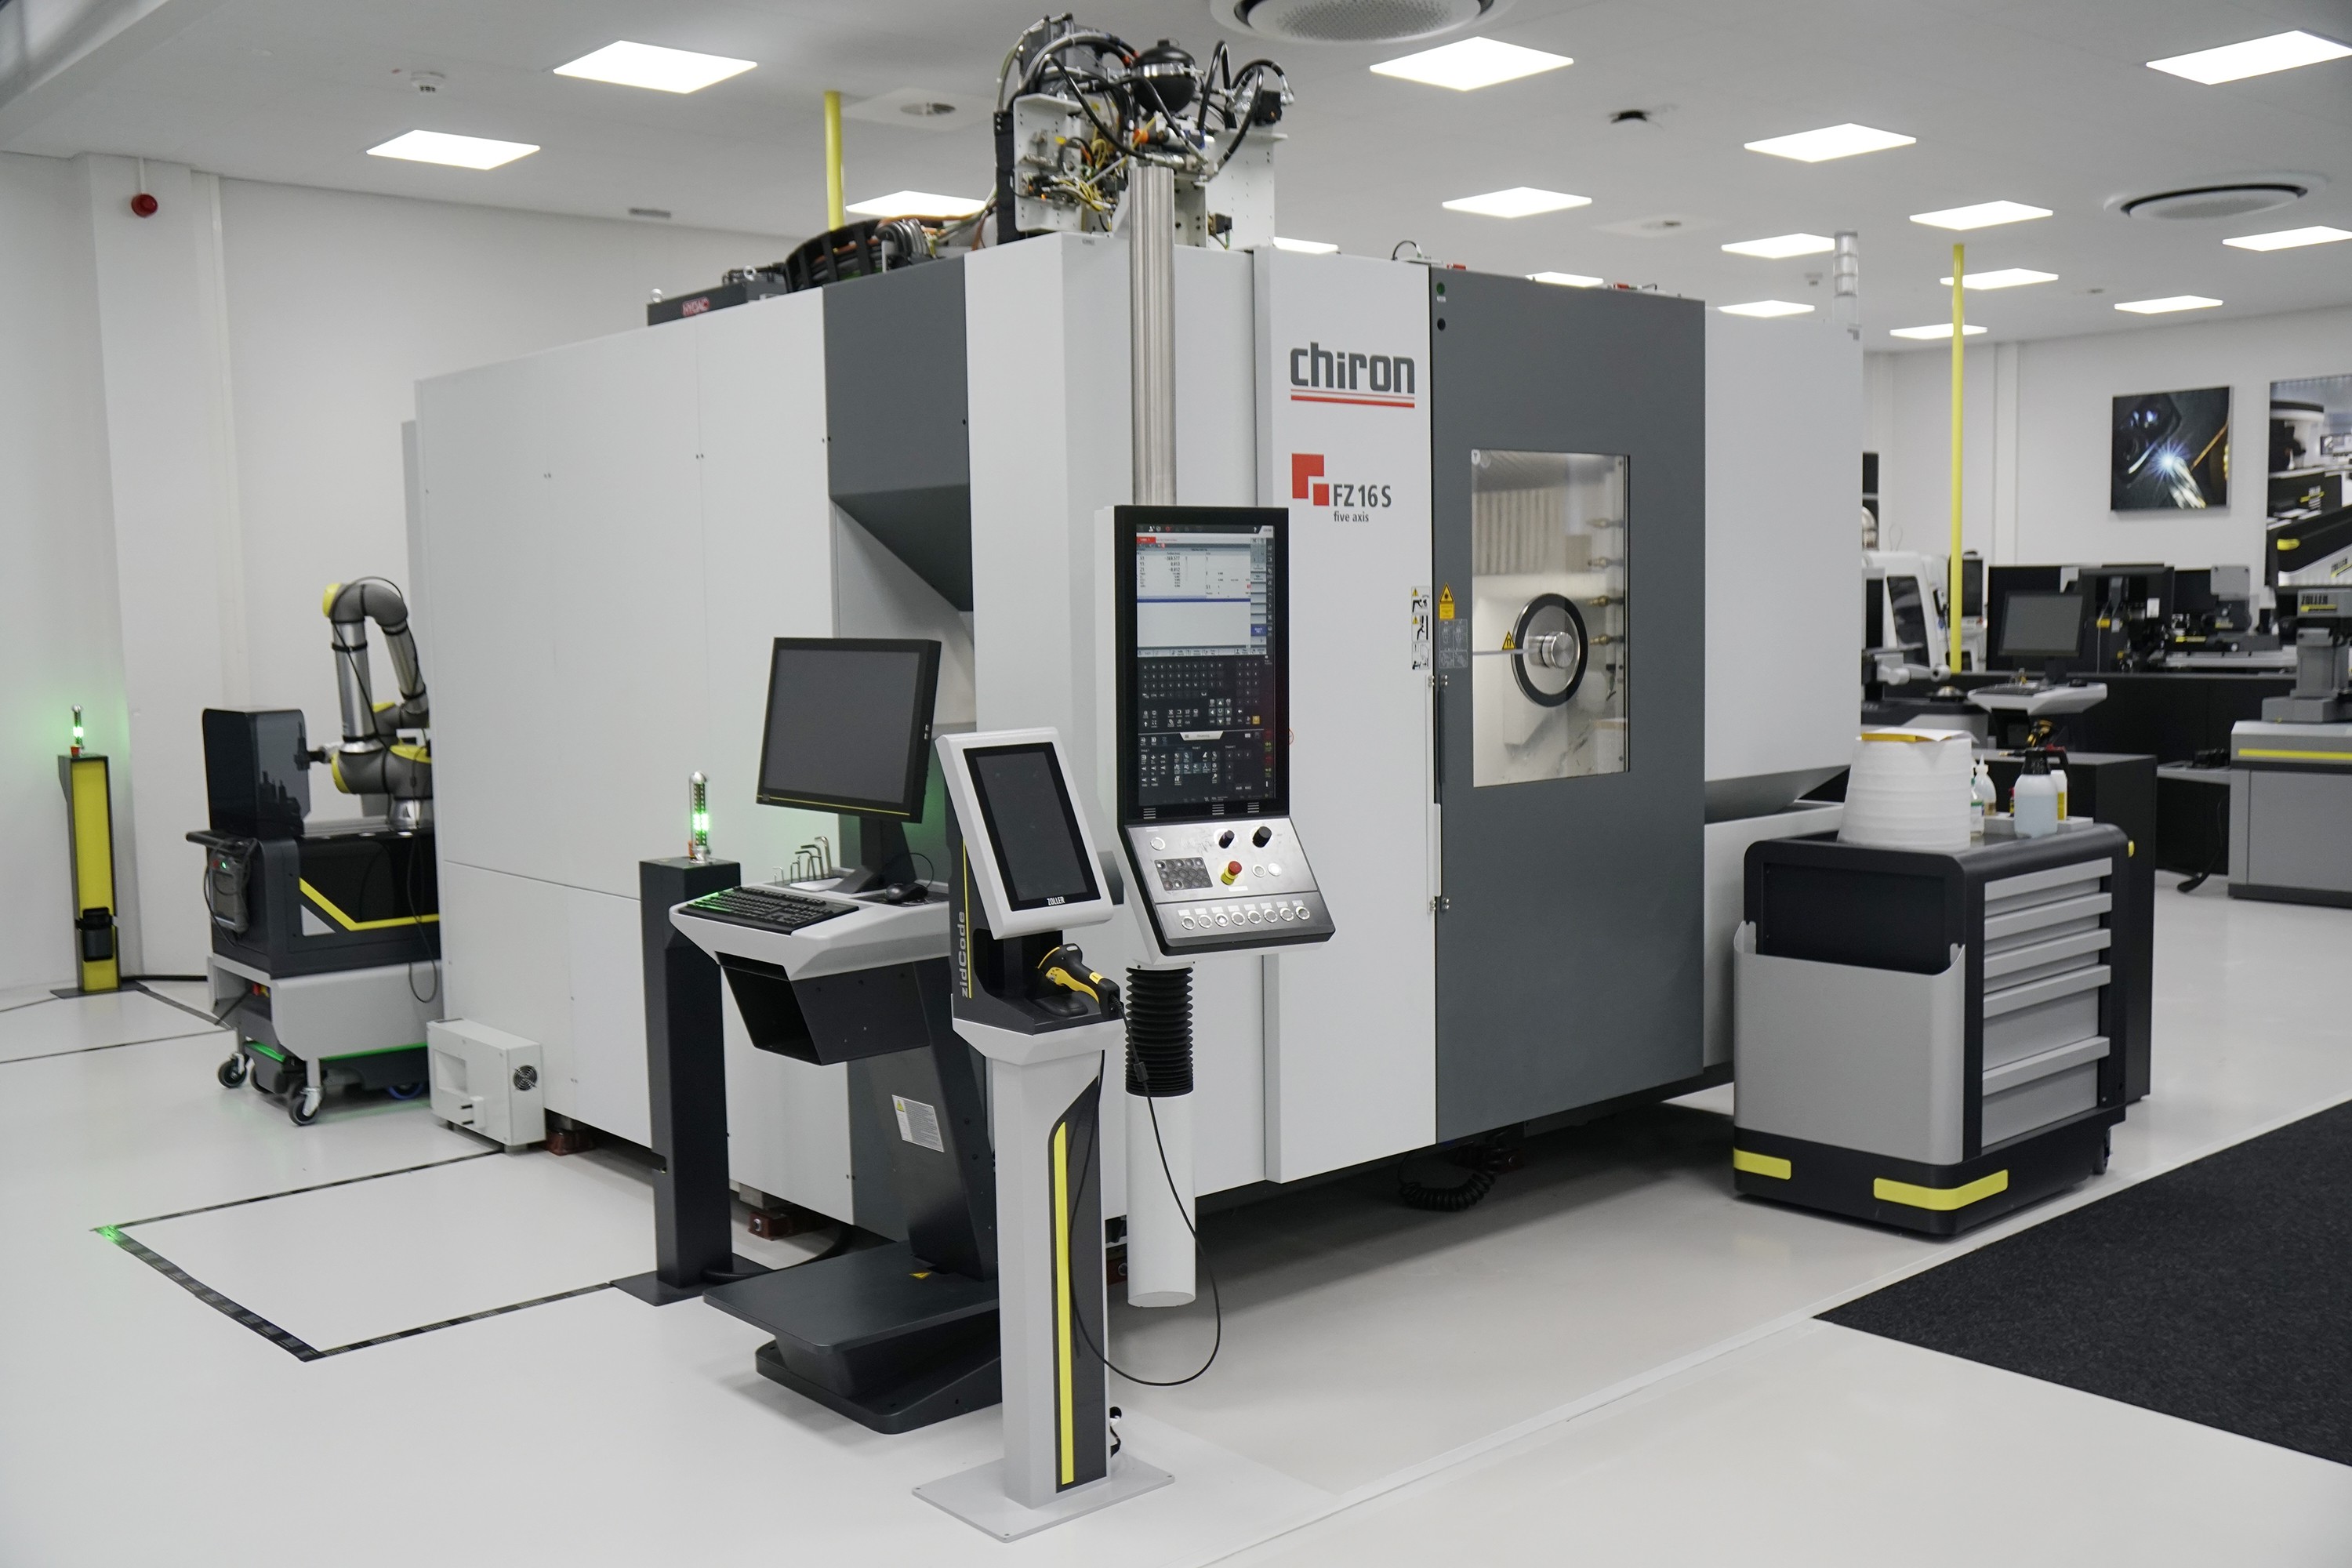 The ZOLLER smart factory in Pleidelsheim, Germany: Automated tool handling is tested and further developed using the CHIRON FZ 16 S five axis.